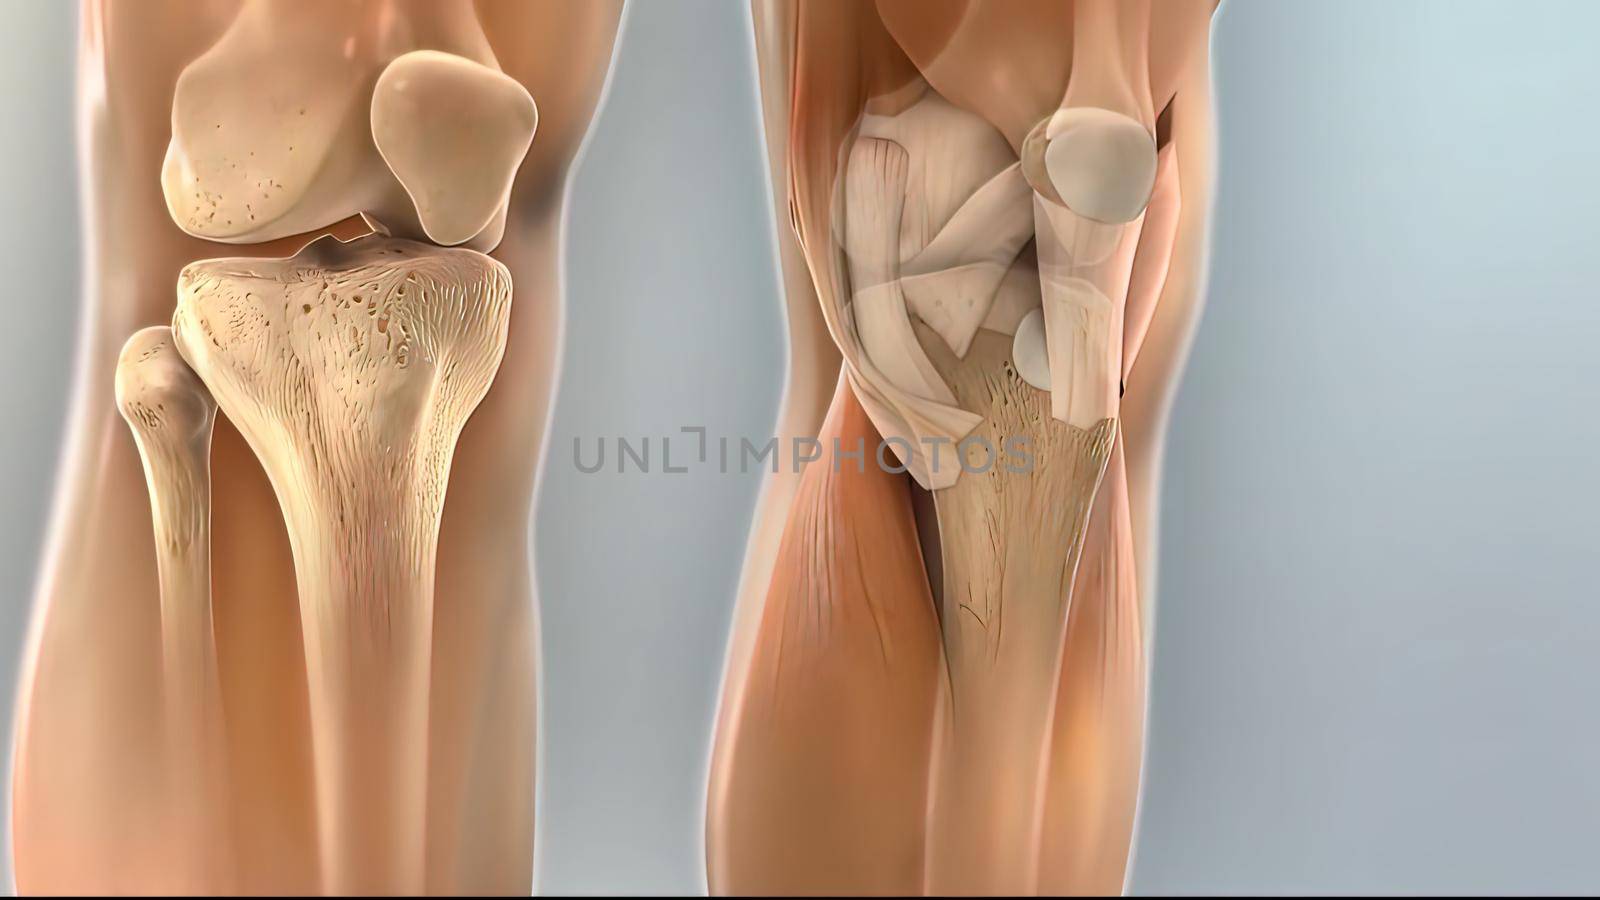 3d rendered medically accurate illustration of the lower leg muscles